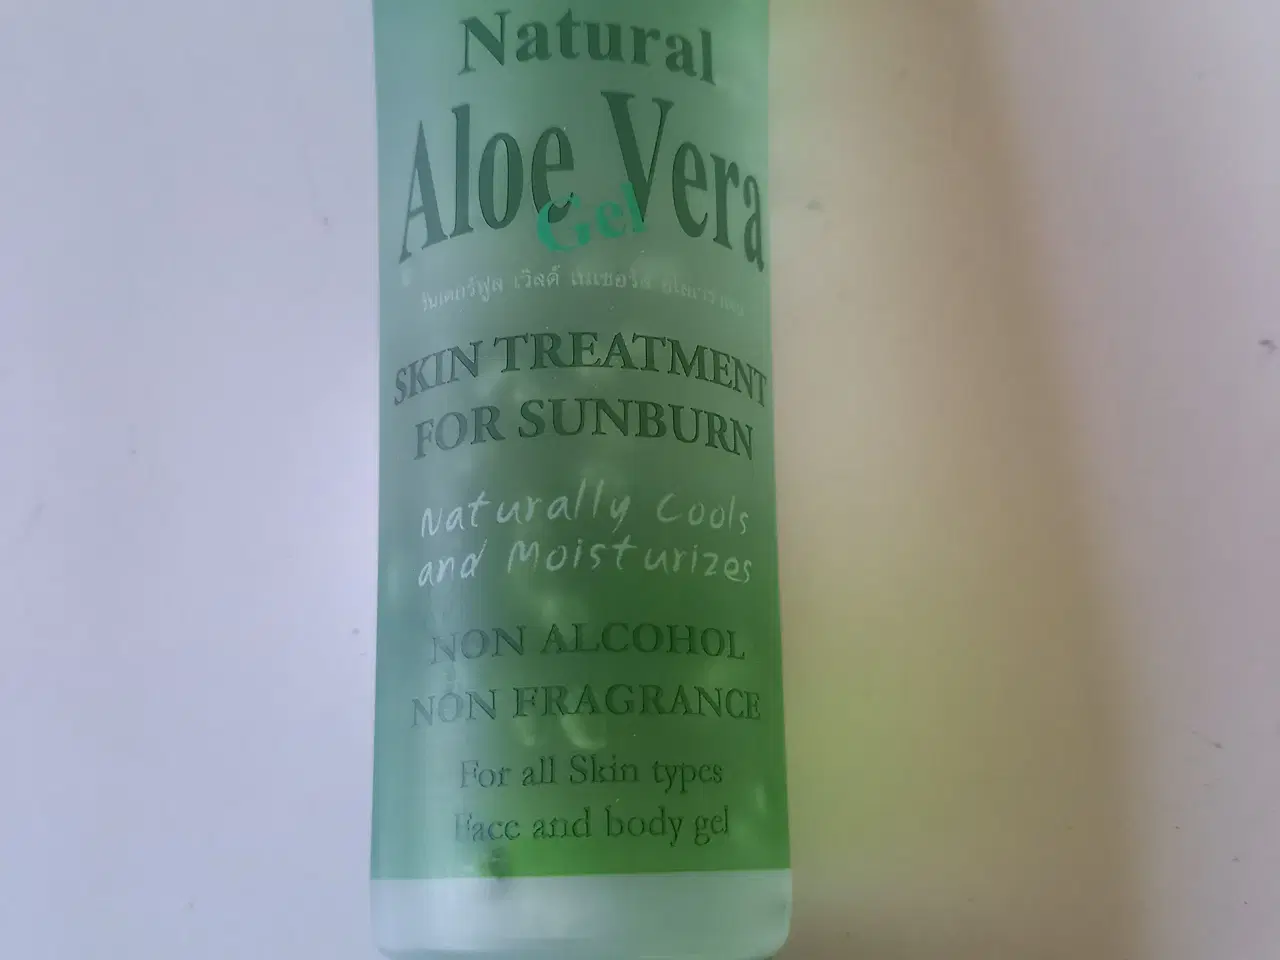 Billede 1 - Aftersun Aloe Vera for face and body